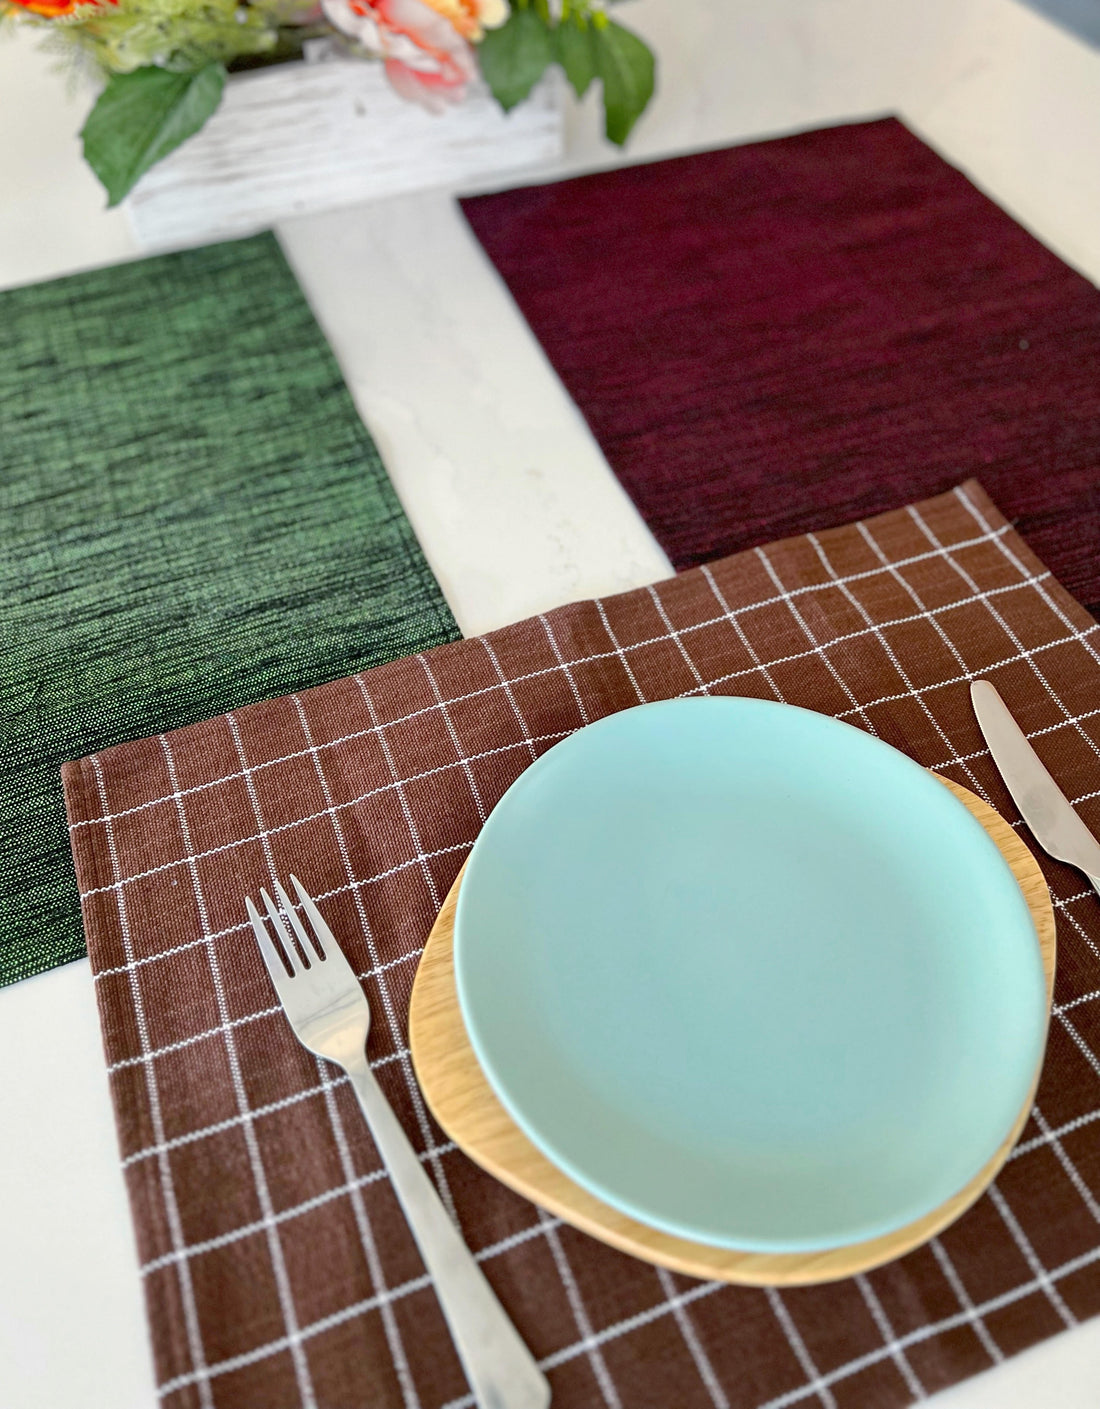 Why Use Woven Placemats?